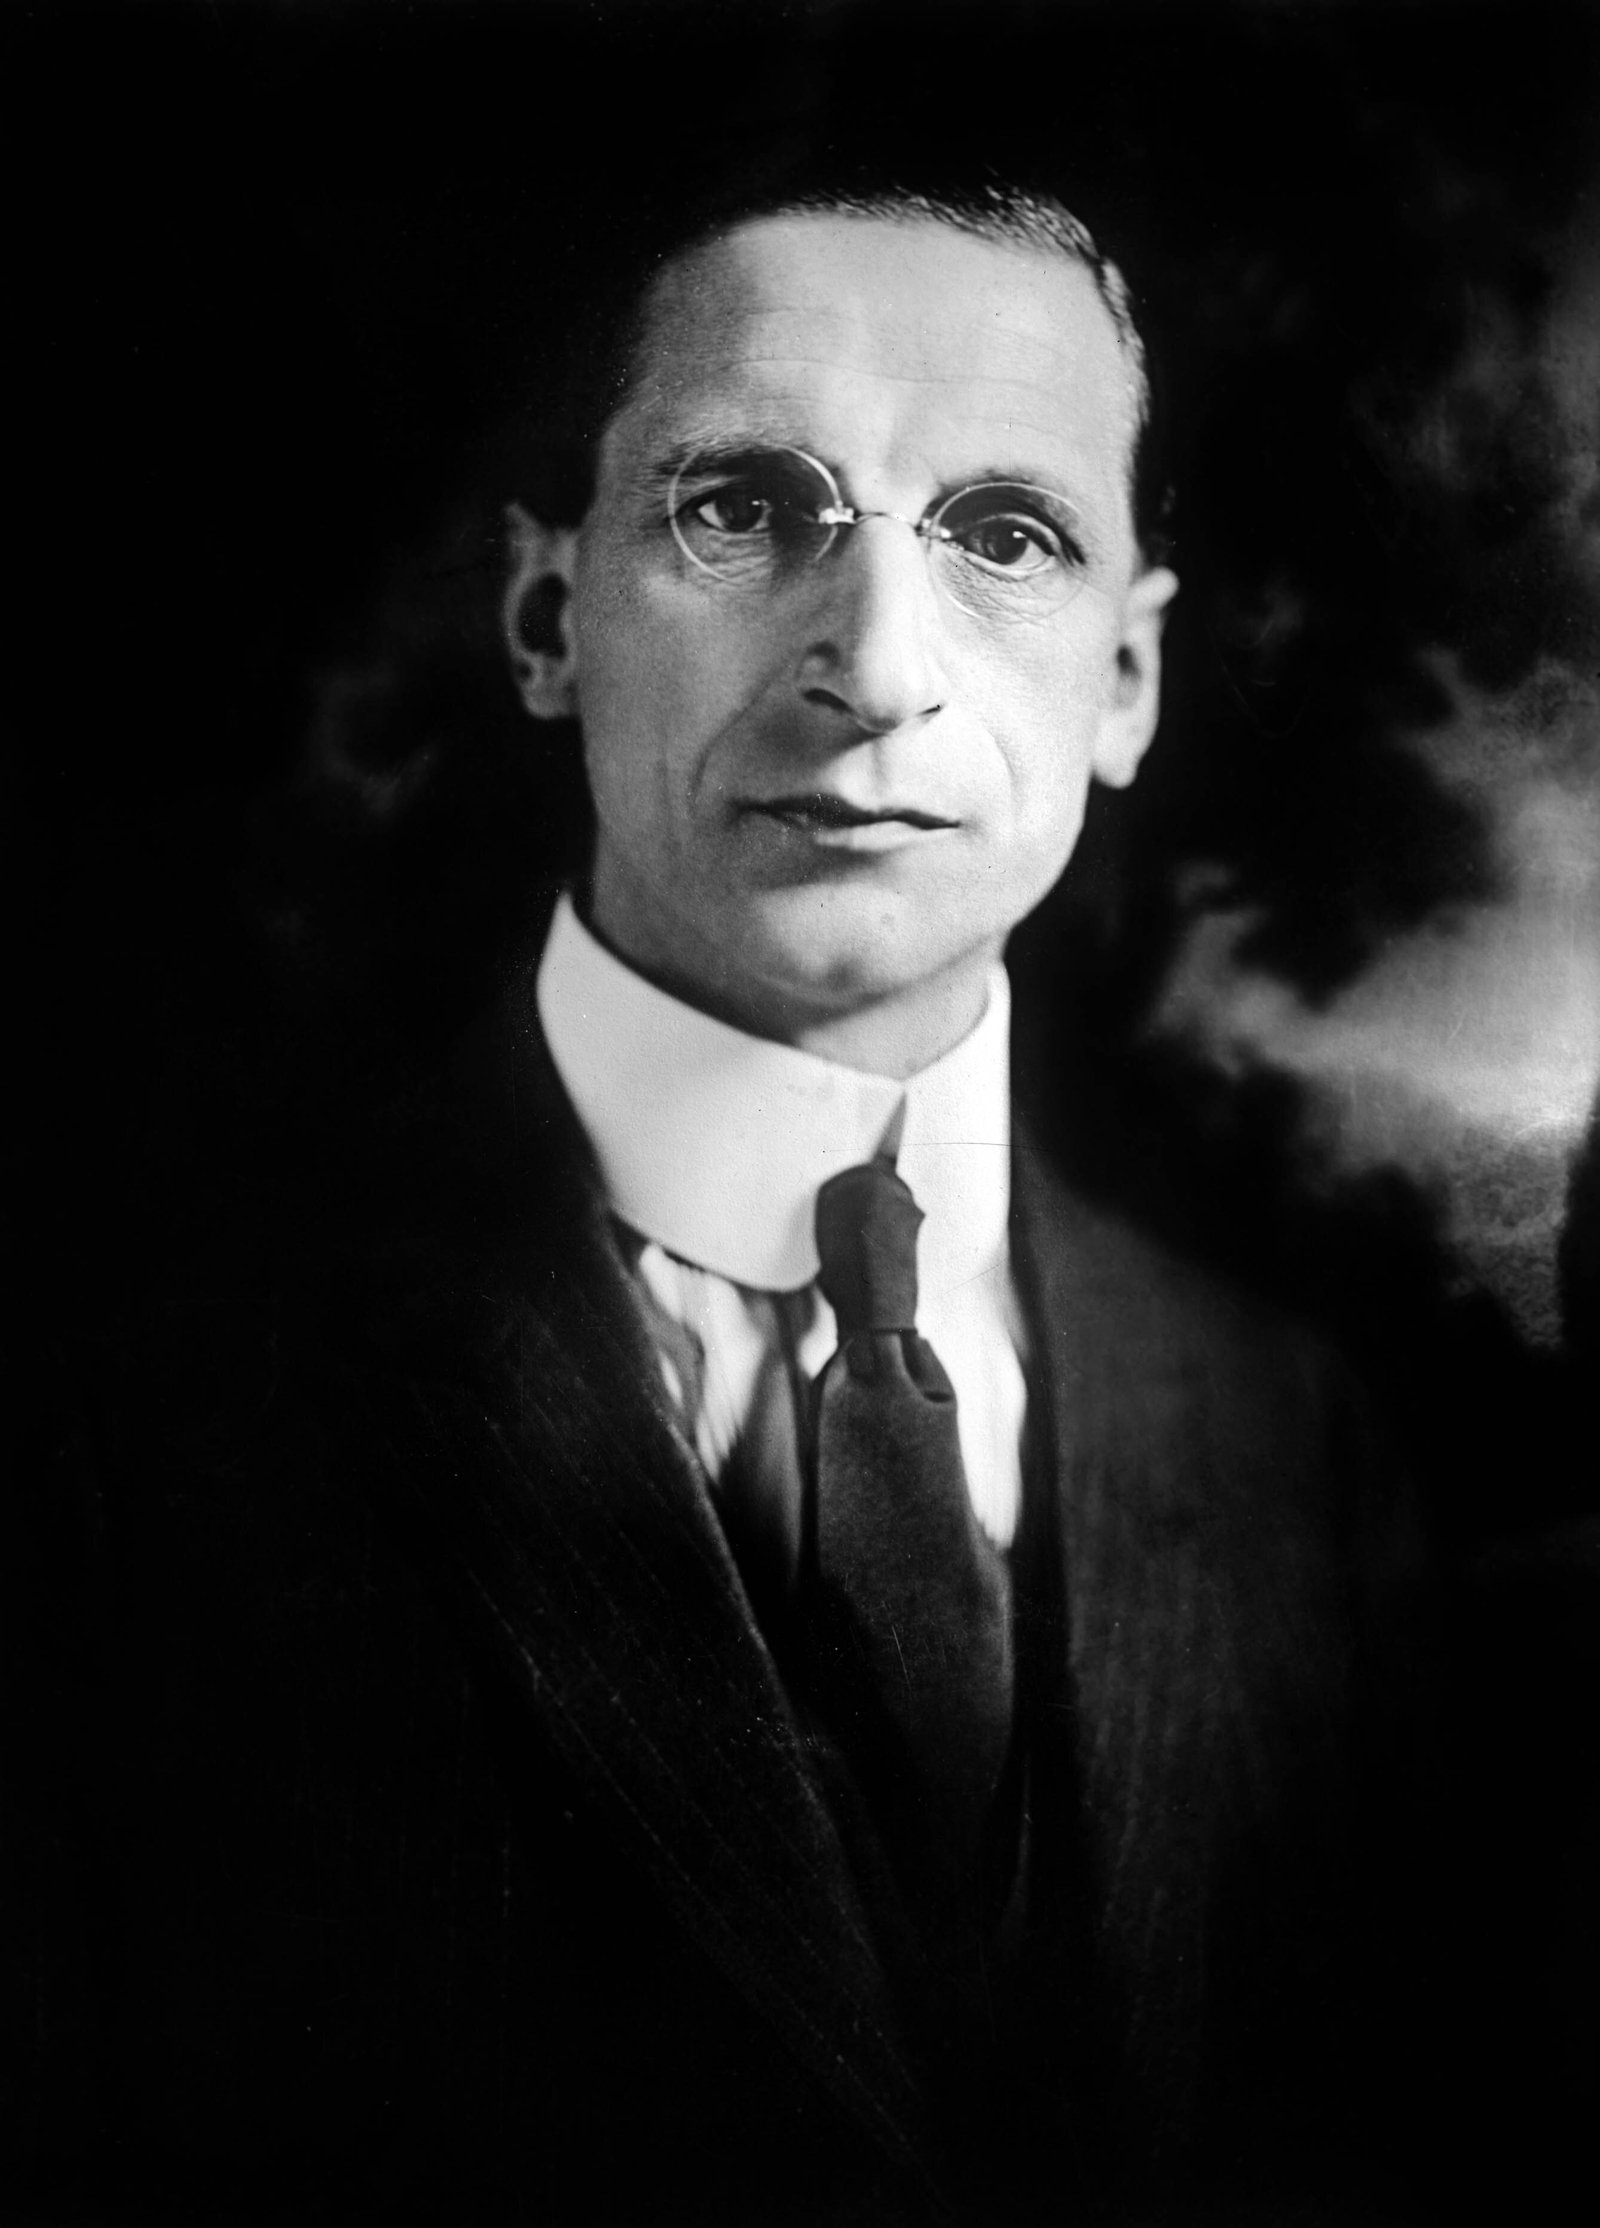 Image - Éamon de Valera: '....it is absolutely inconsistent with our position; it gives away Irish independence; it brings us into the British Empire...' Credit: Getty Images